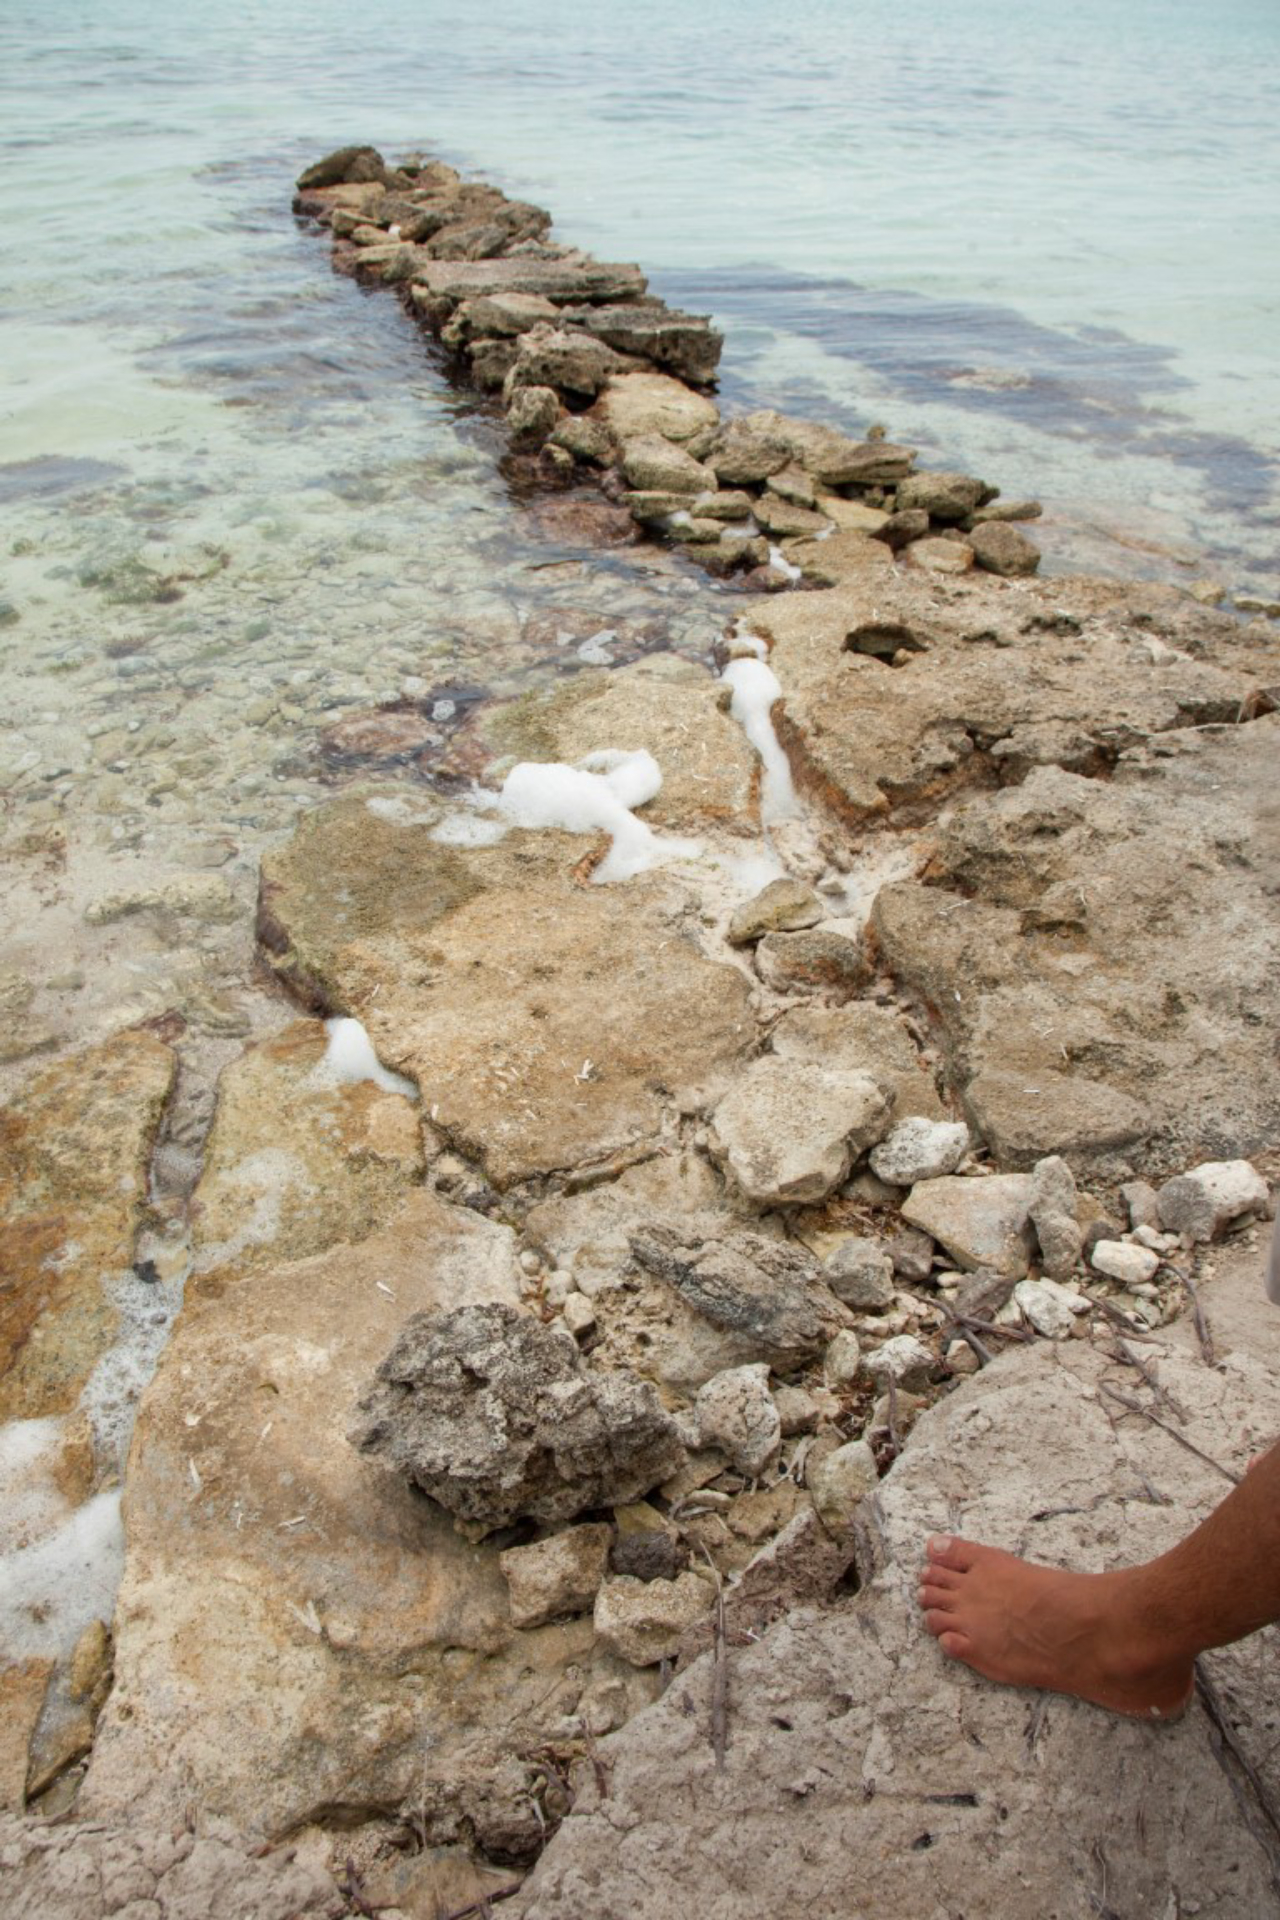 A rock jetty built to prevent erosion on Blackadore Caye, an island off Belize recently purchased by Leonardo DiCaprio, March 27, 2015. DiCaprio aims to open an eco-conscious resort here while also setting right the erosion, deforestation and overfishing the 104-acre island has endured. (Benedict Kim/The New York Times)